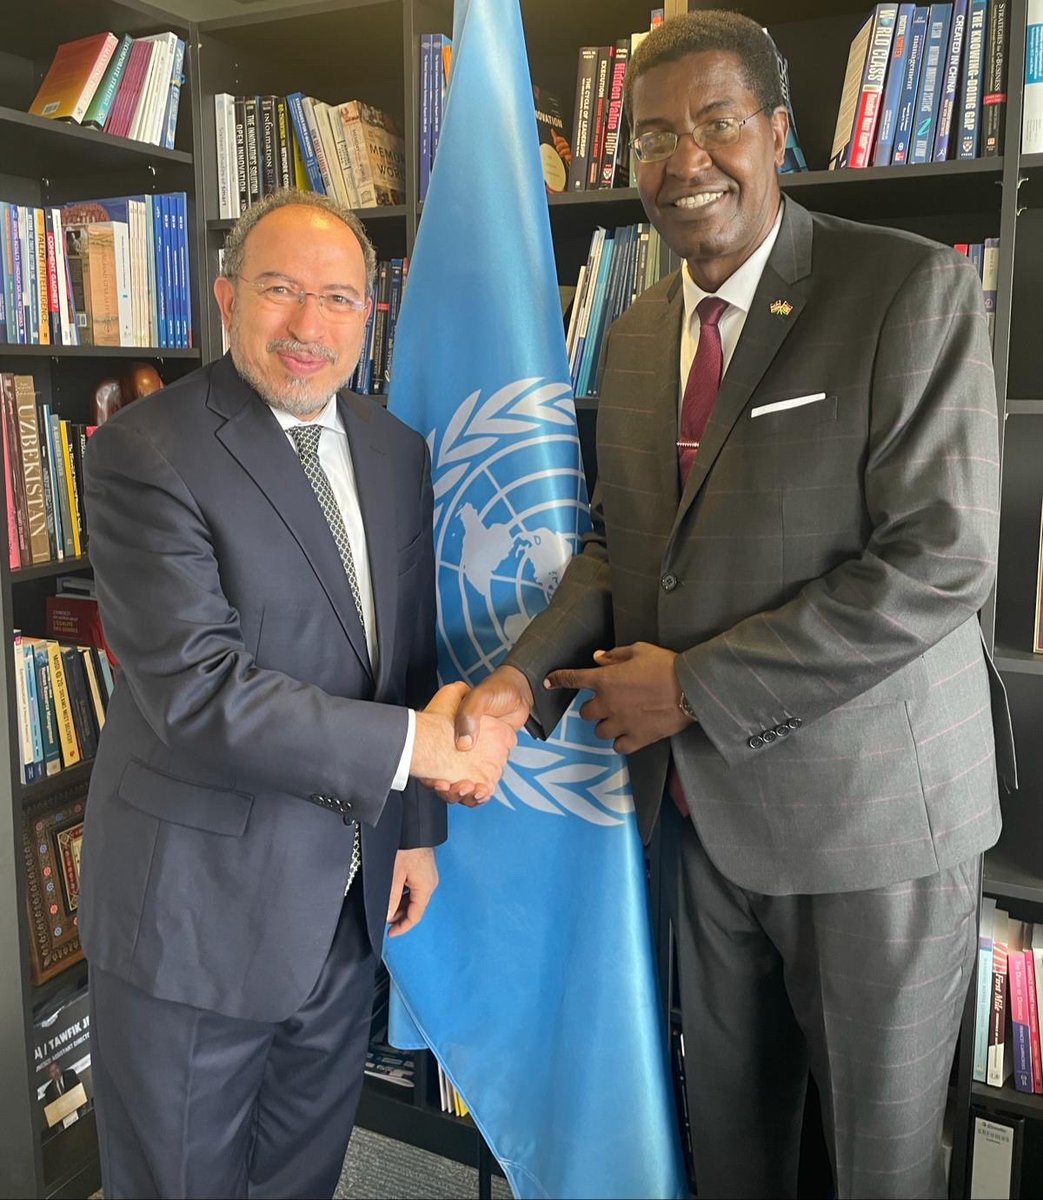 Very fruitful meeting with the new Ambassador and Permanent Delegate of #Kenya to UNESCO, H.E. Prof Peter K. Ngure, exploring collaboration opportunities on #DigitalTransformation, media and information literacy and combatting online hate speech. Look forward to working with you.